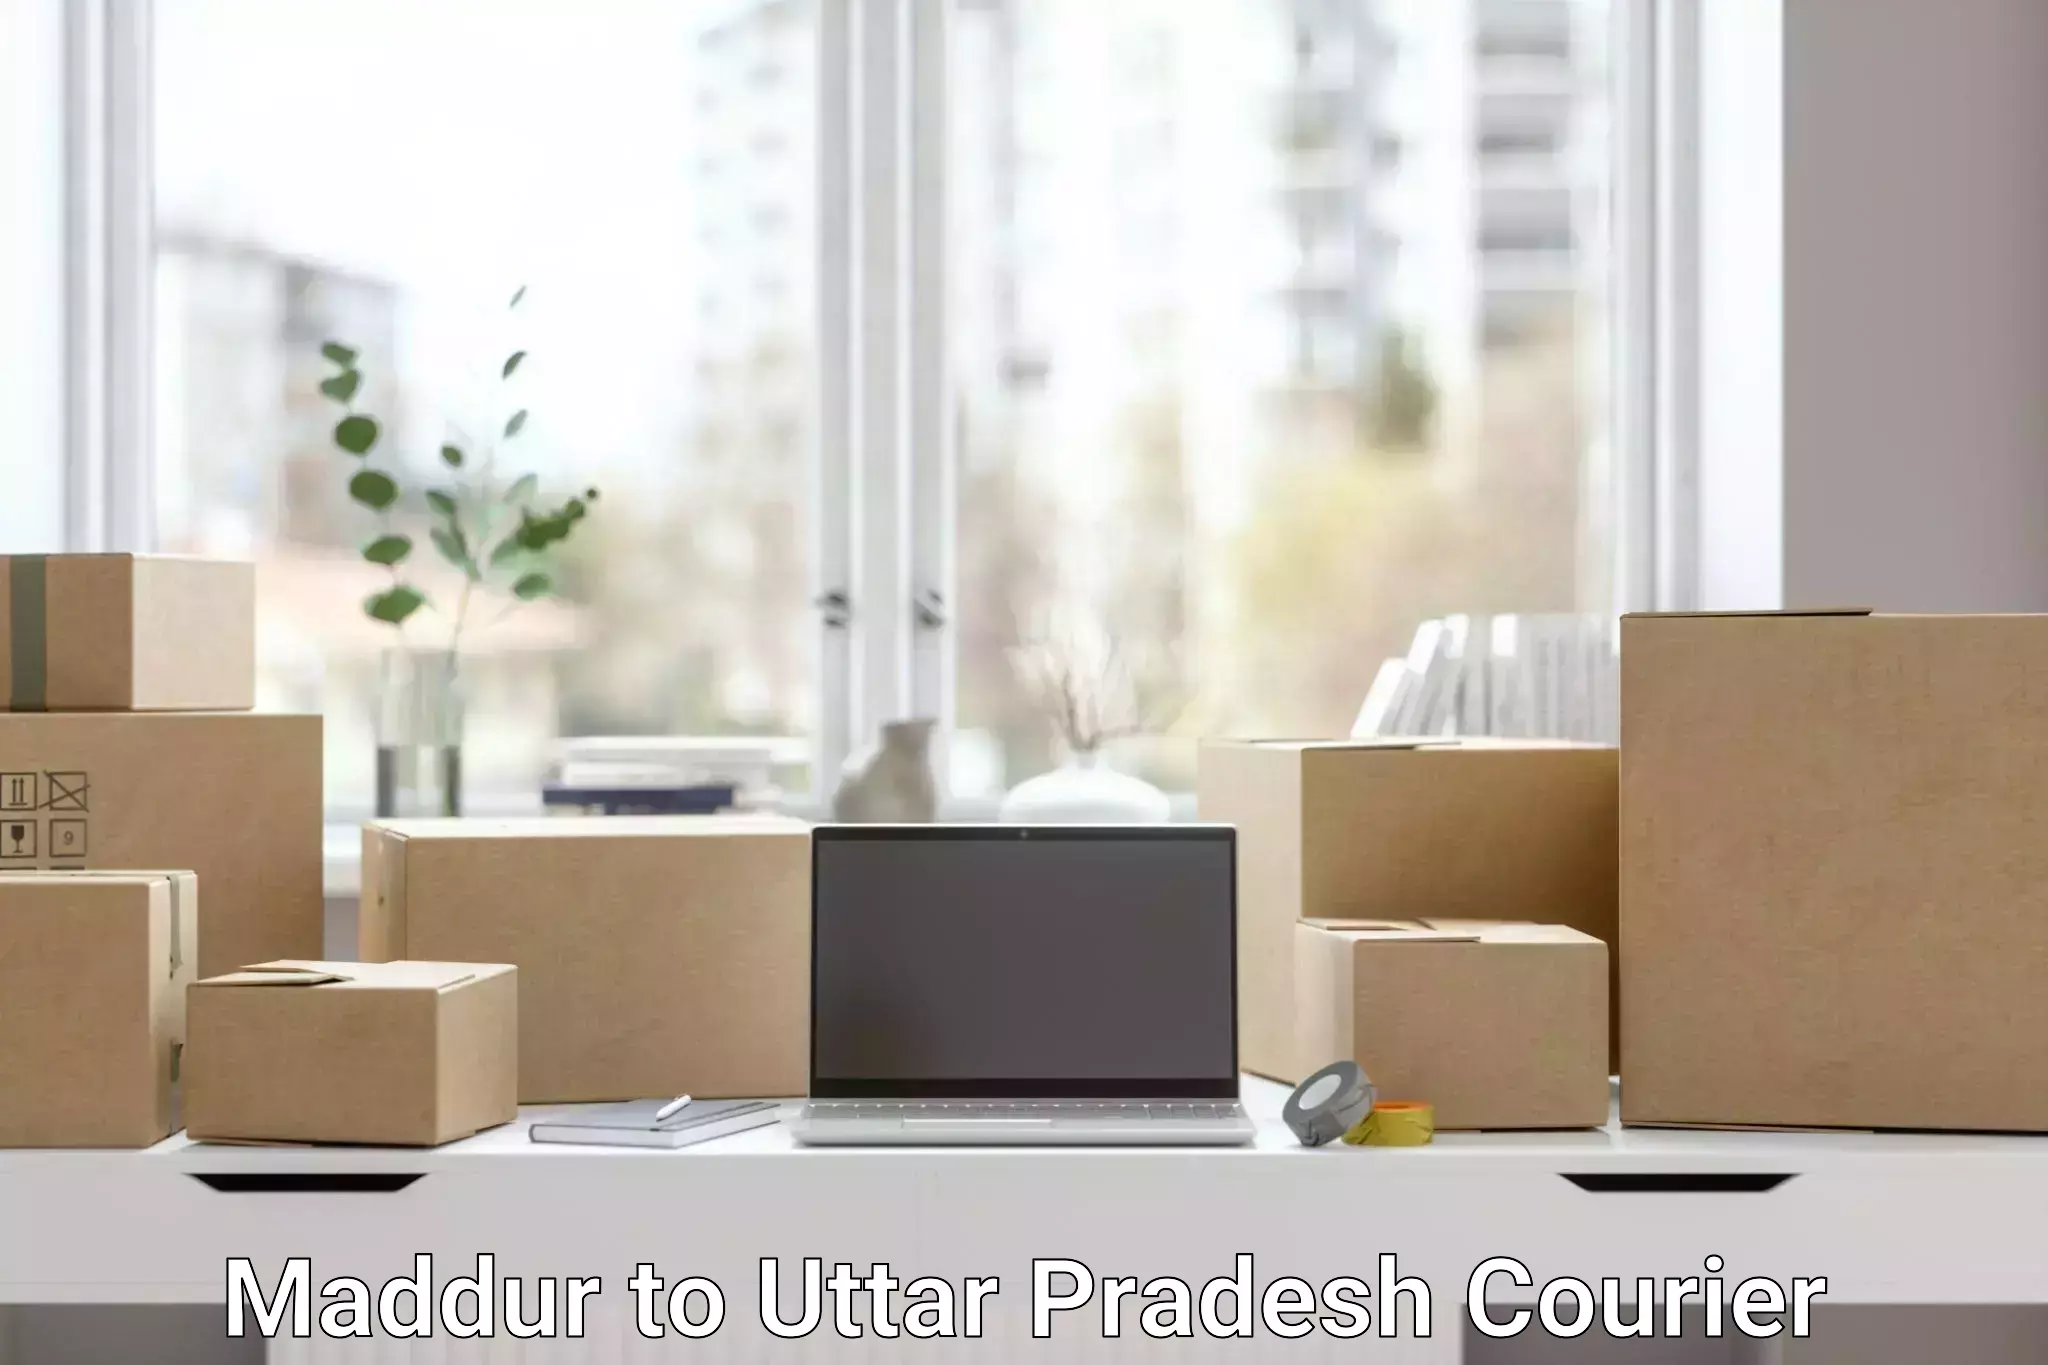 Corporate courier solutions Maddur to Varanasi